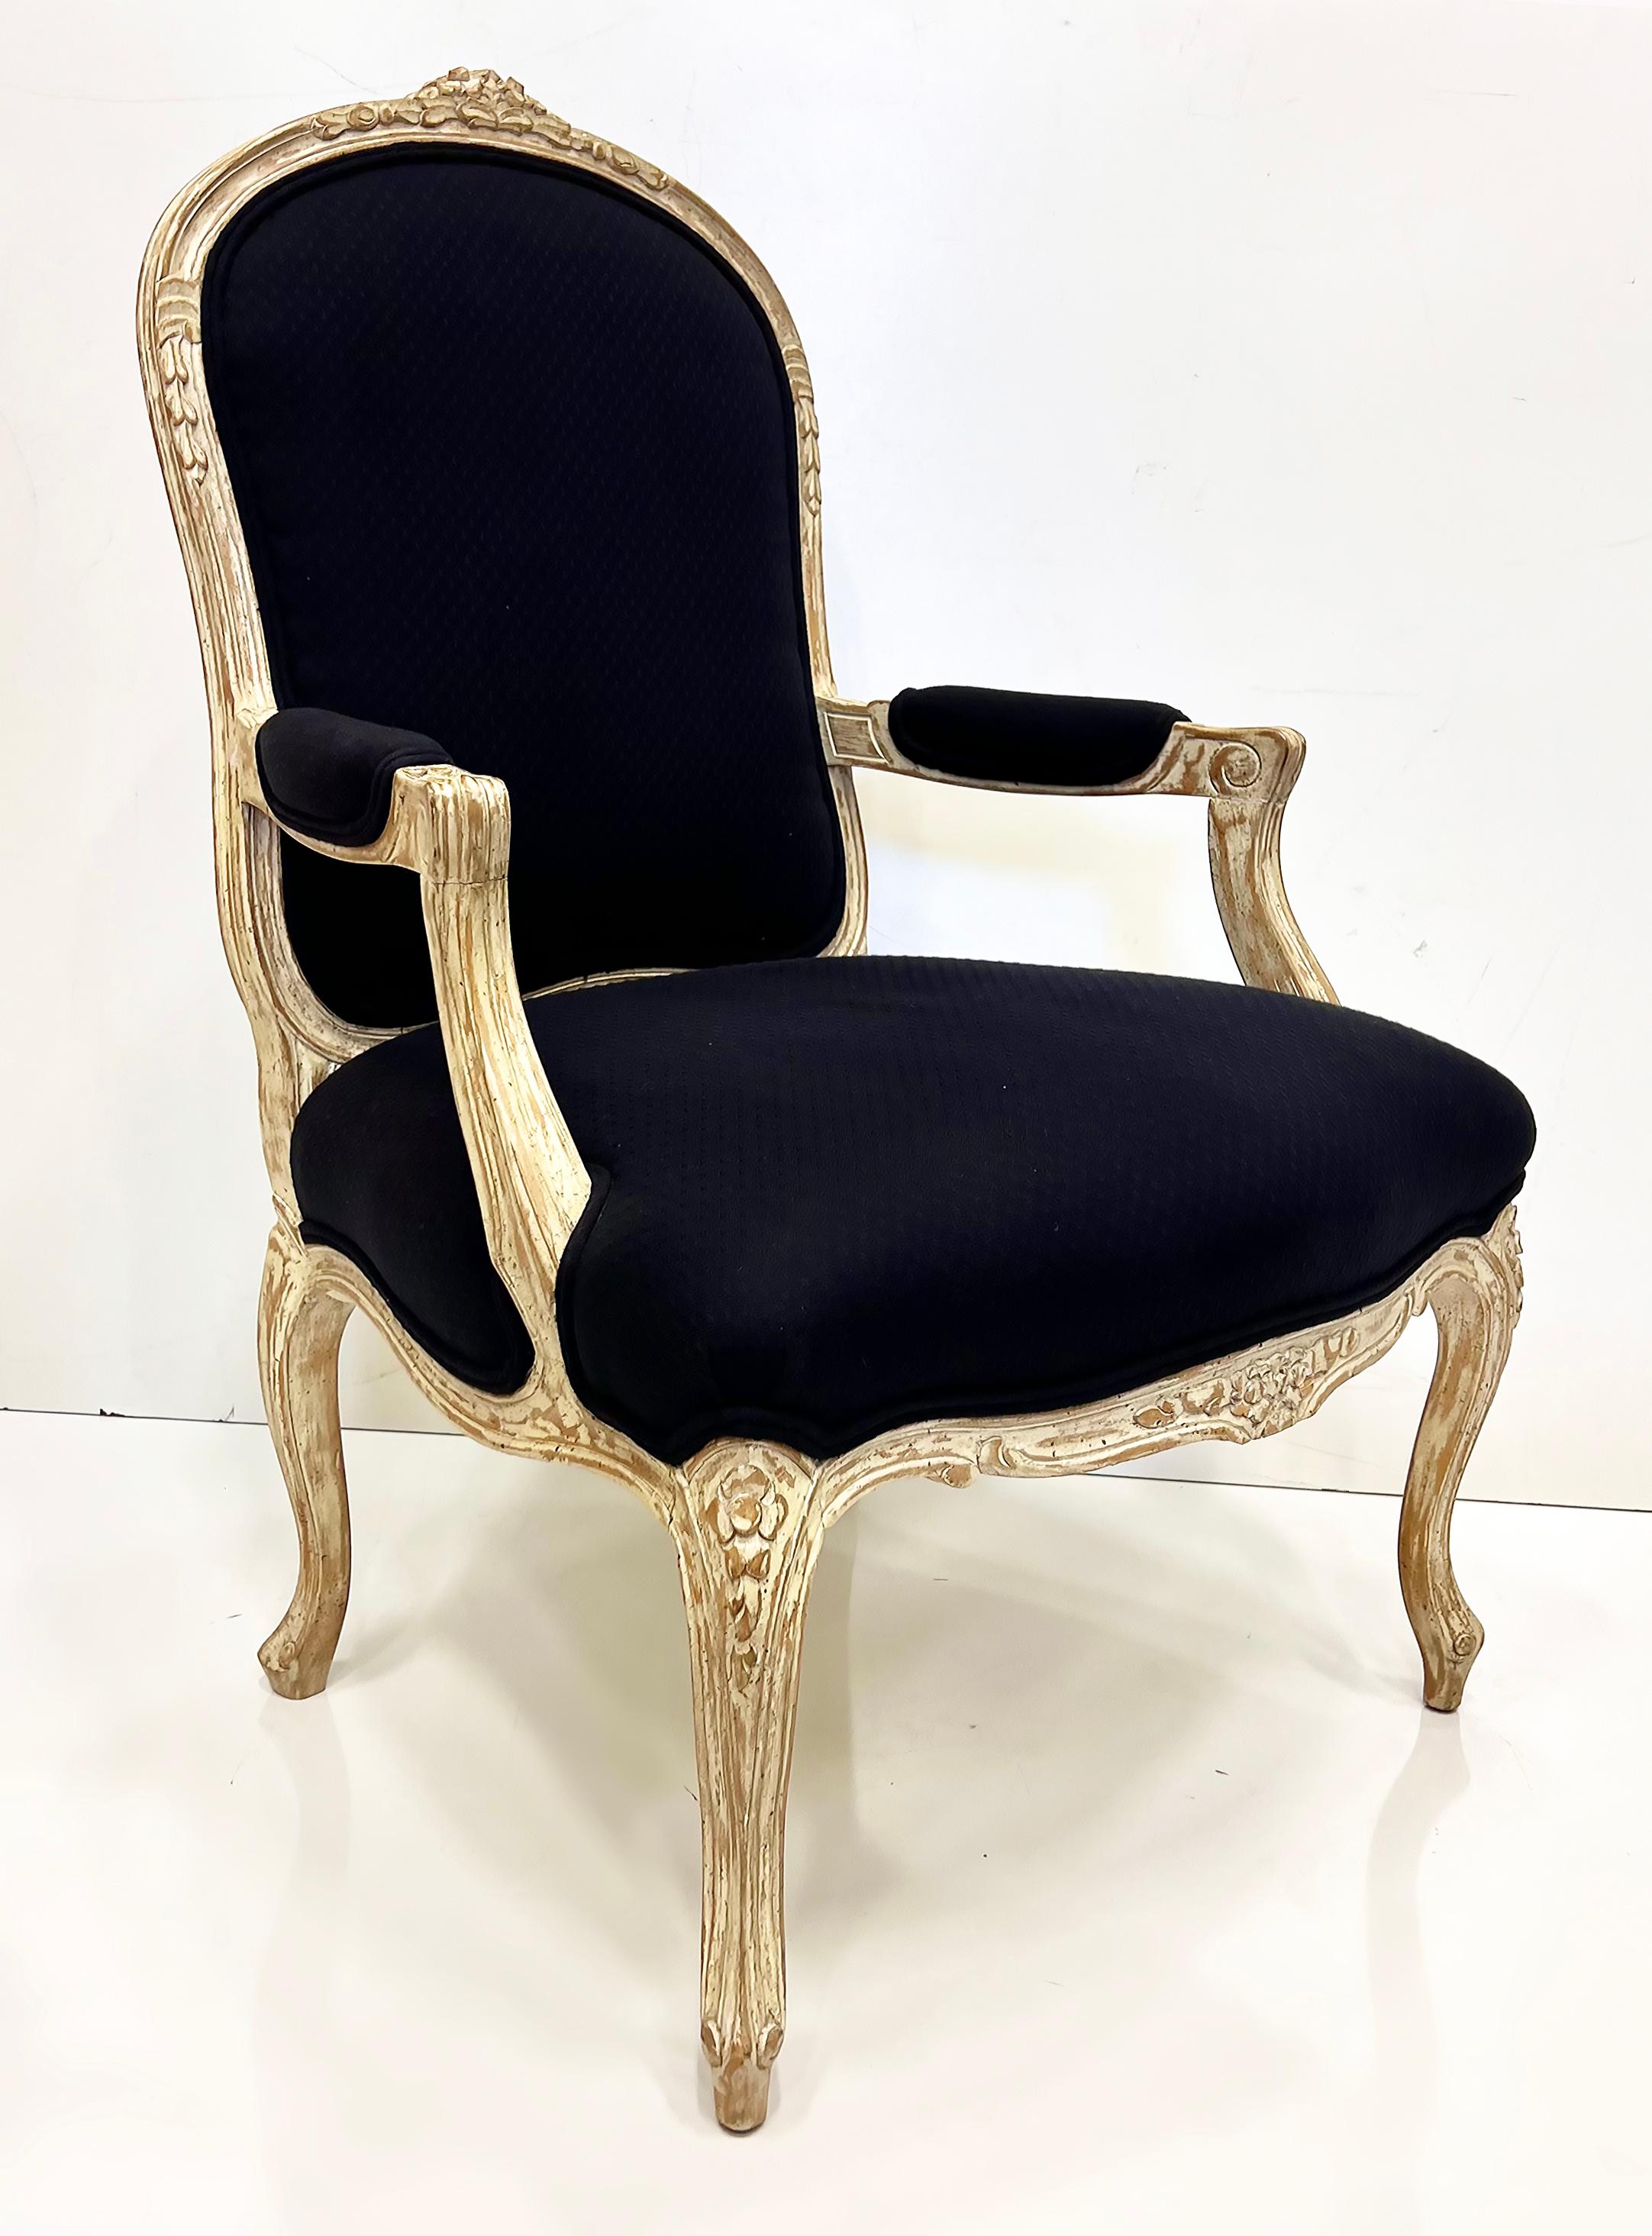 Substantial Vintage Louis XV Style Fauteuil Chairs, Large Scale Pair In Good Condition For Sale In Miami, FL